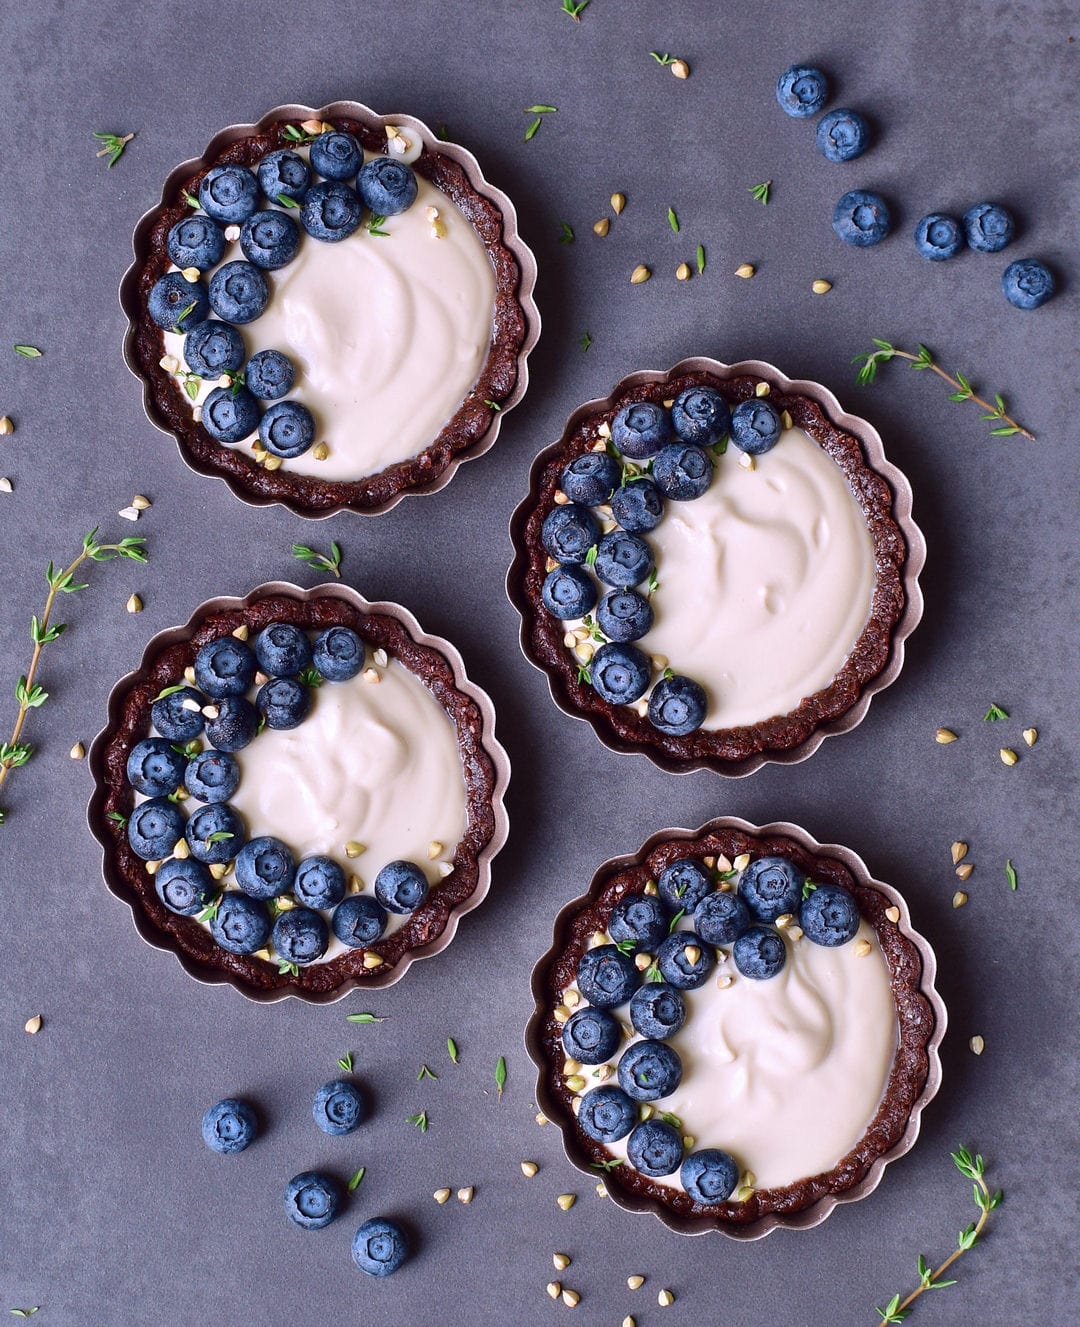 Vegan cheesecake tarts, which are easy to make, gluten-free, refined sugar free, nut-free, and 100% plant-based. The recipe requires no baking. Creamy and delicious dessert which is ready in no time